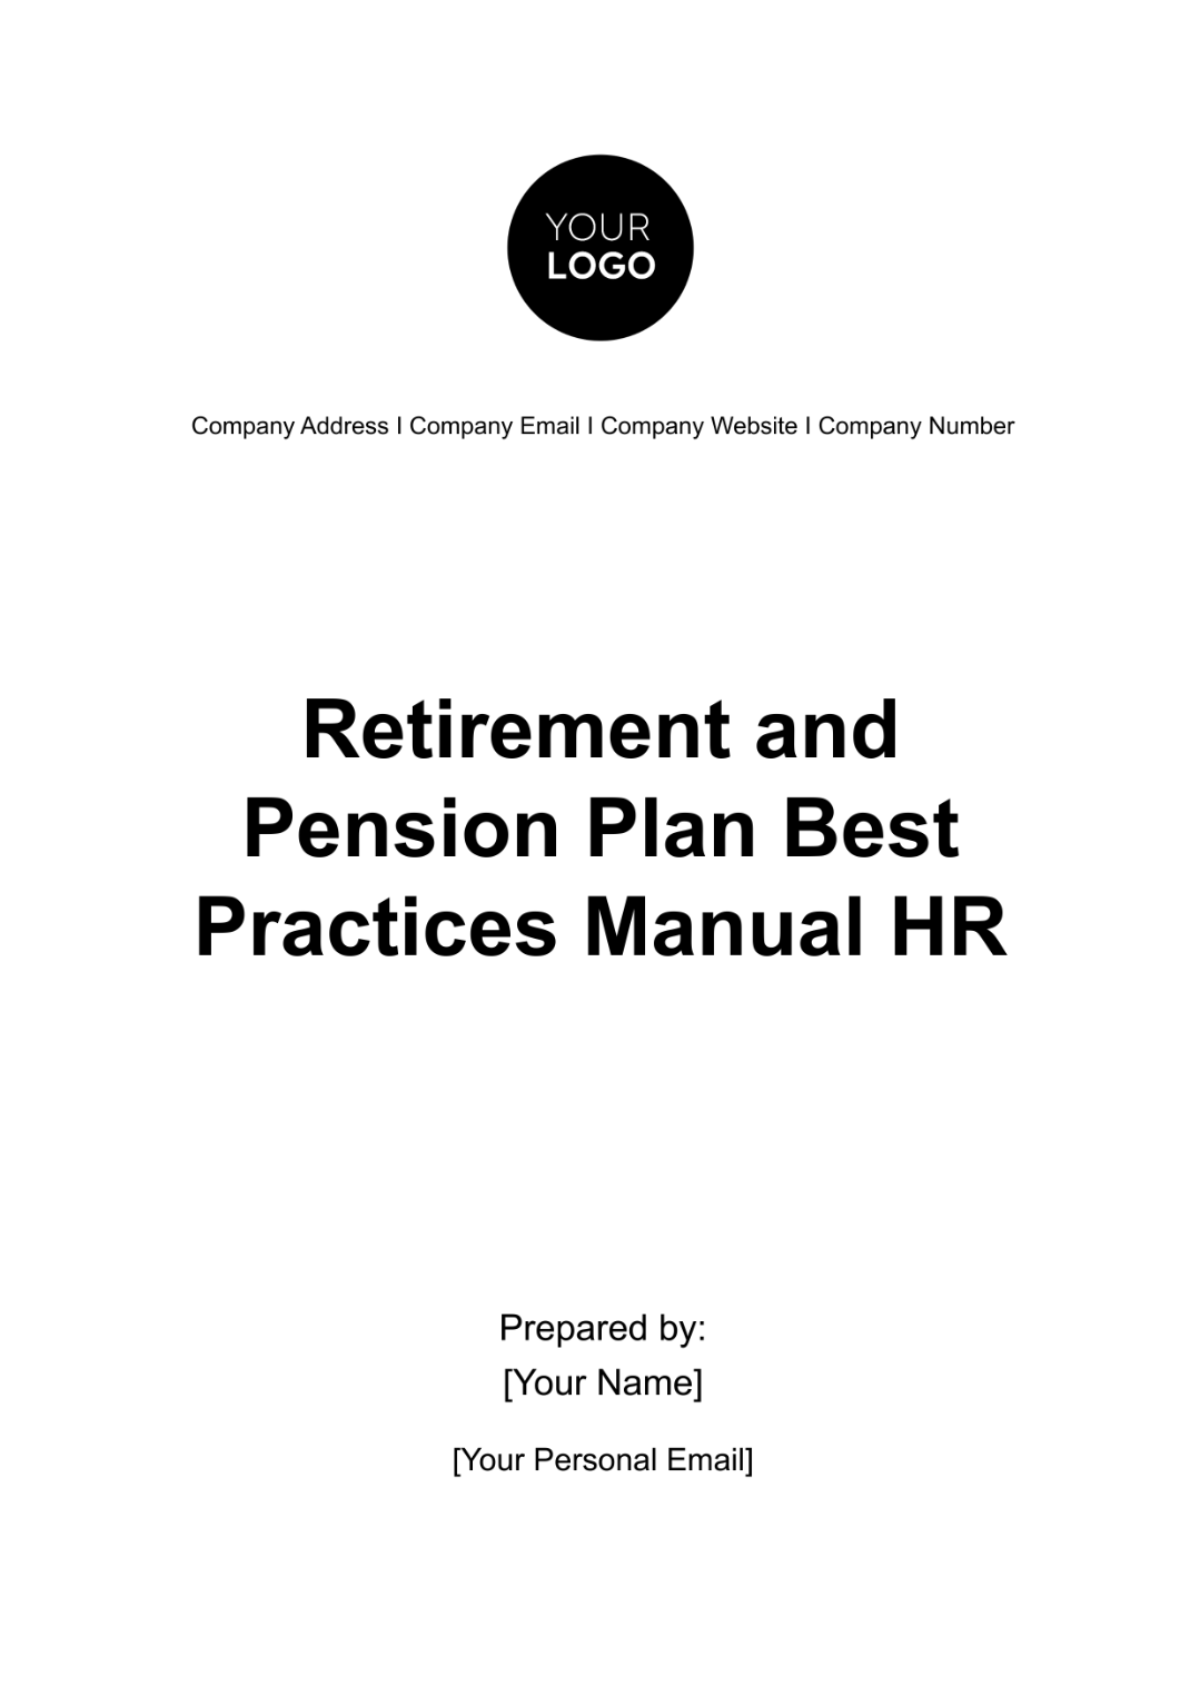 Free Retirement and Pension Plan Best Practices Manual HR Template